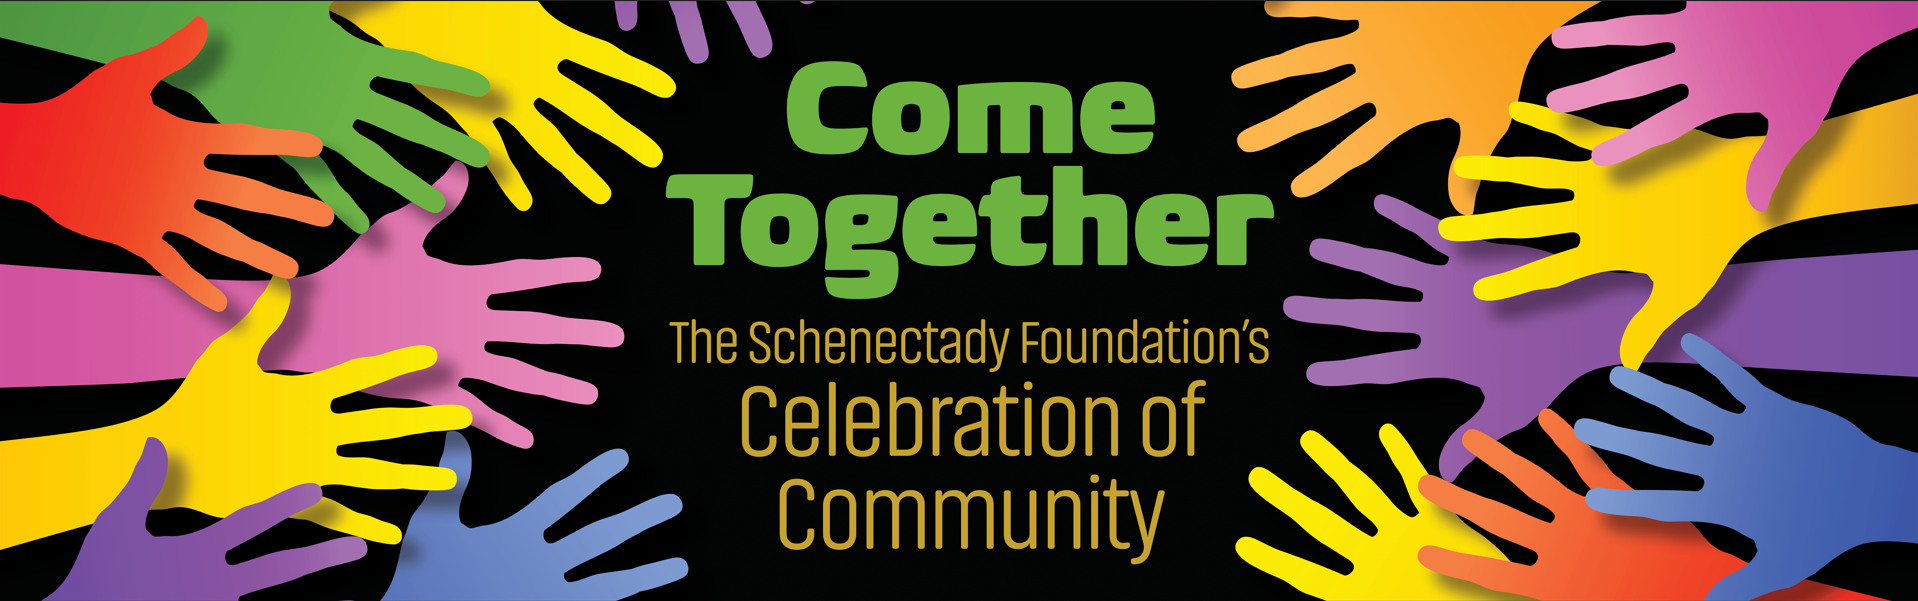 Join us for a Celebration of Community